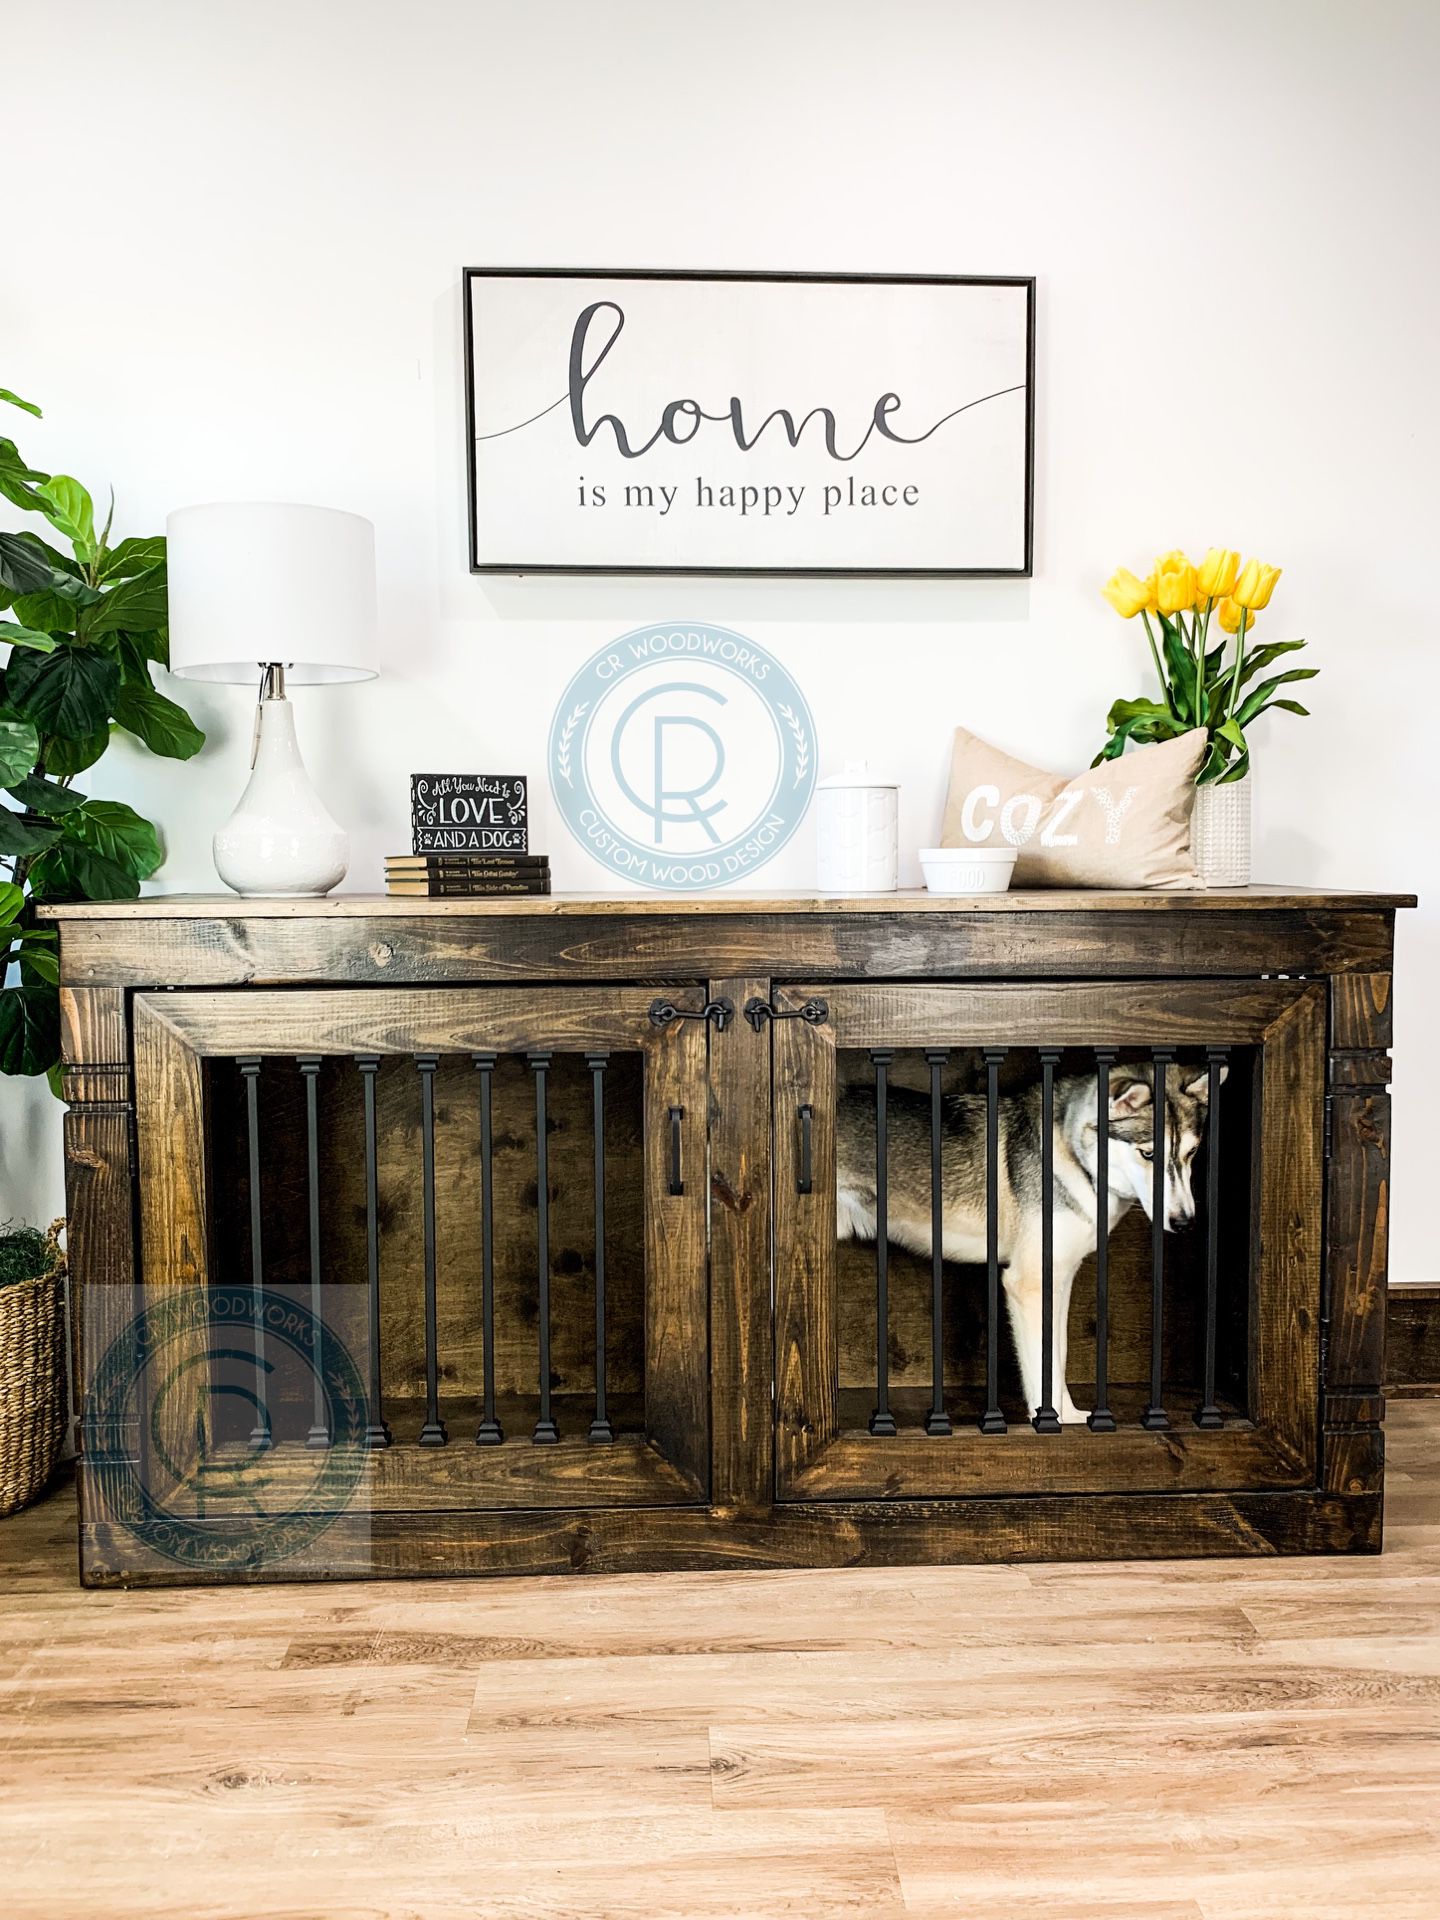 Custom built dog kennel Crate House Cage Bench Barn Door Farmhouse Modern Rustic Toy Puppy Accessories Tv Stand Console